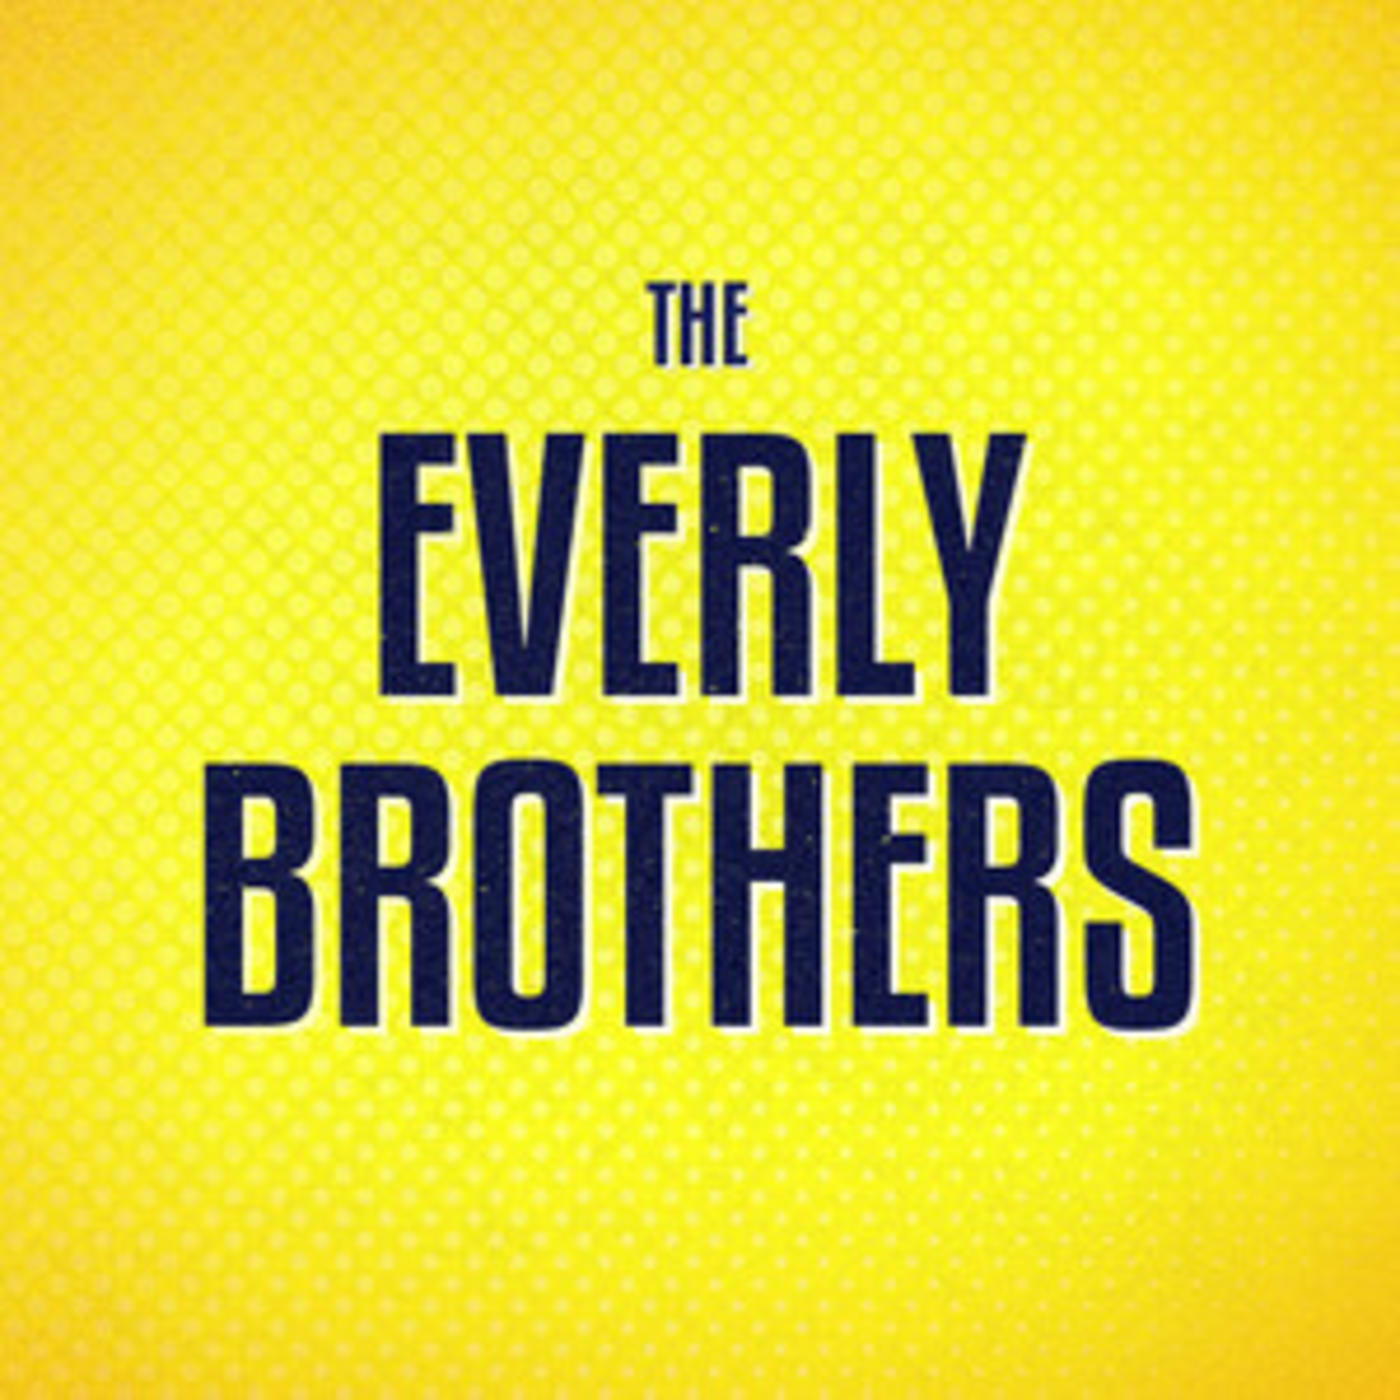 Everly Brothers - Official Playlist - All I Have To Do Is Dream, Wake Up Little Susie, Bye Bye Love